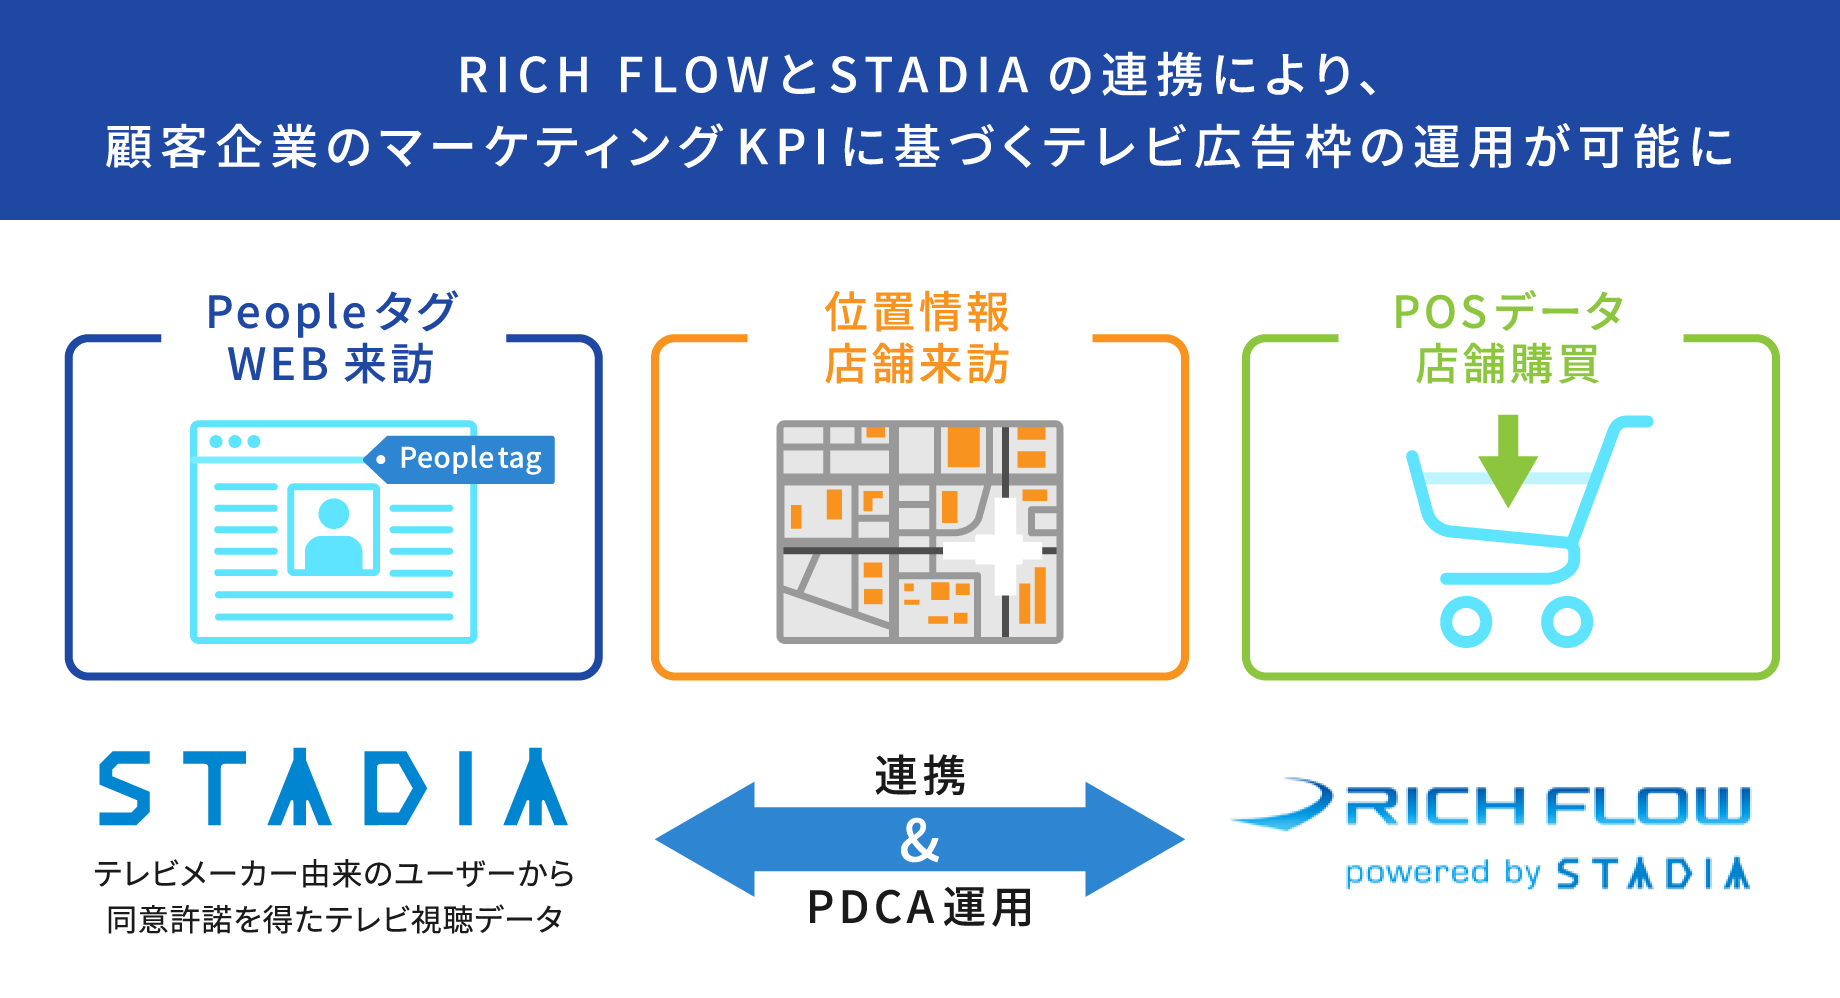 「RICH FLOW powered by STADIA」概要